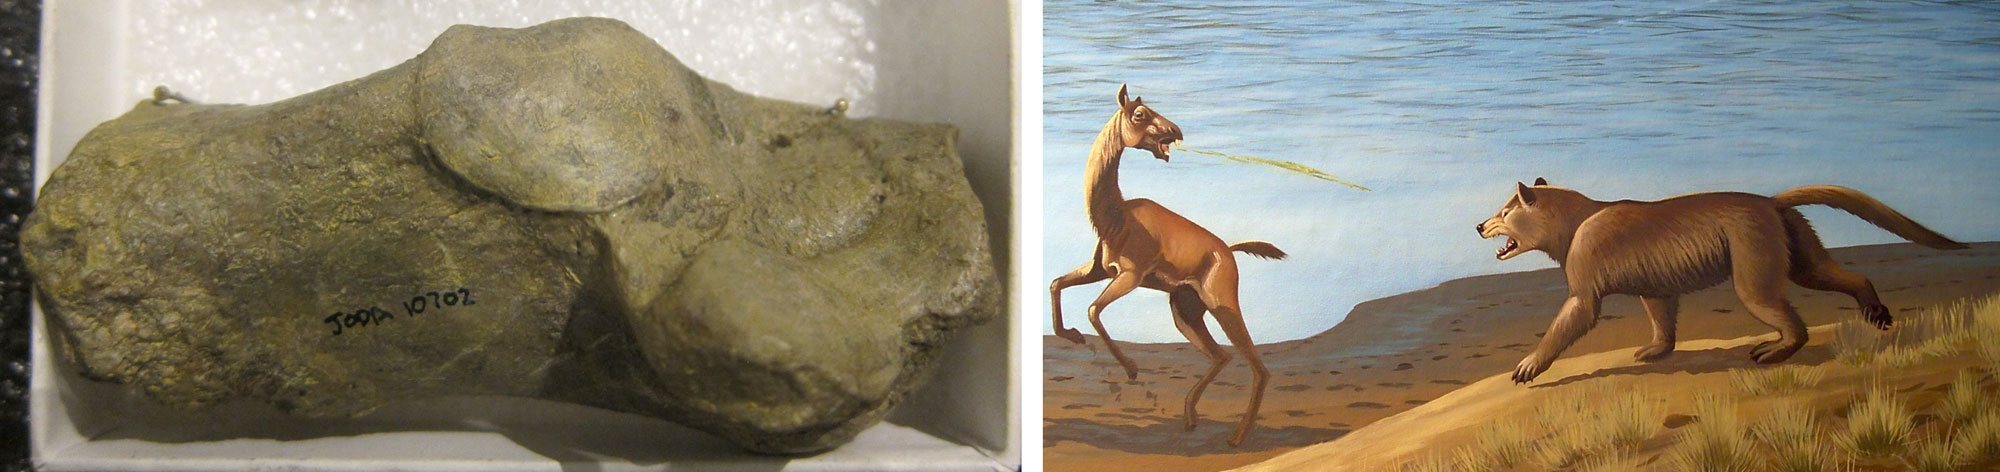 2-panel figure showing mammals from the Miocene Mascall Formation. Panel 1: Photograph of the heel bone fo a bear-dog. The bone is slightly elongated with knob exposed. Panel 2: Portion of a mural showing a bear-dog confronting a camel. The camel is rearing up and has its head turned to face the bear-dog. It is spitting at the bear-dog.